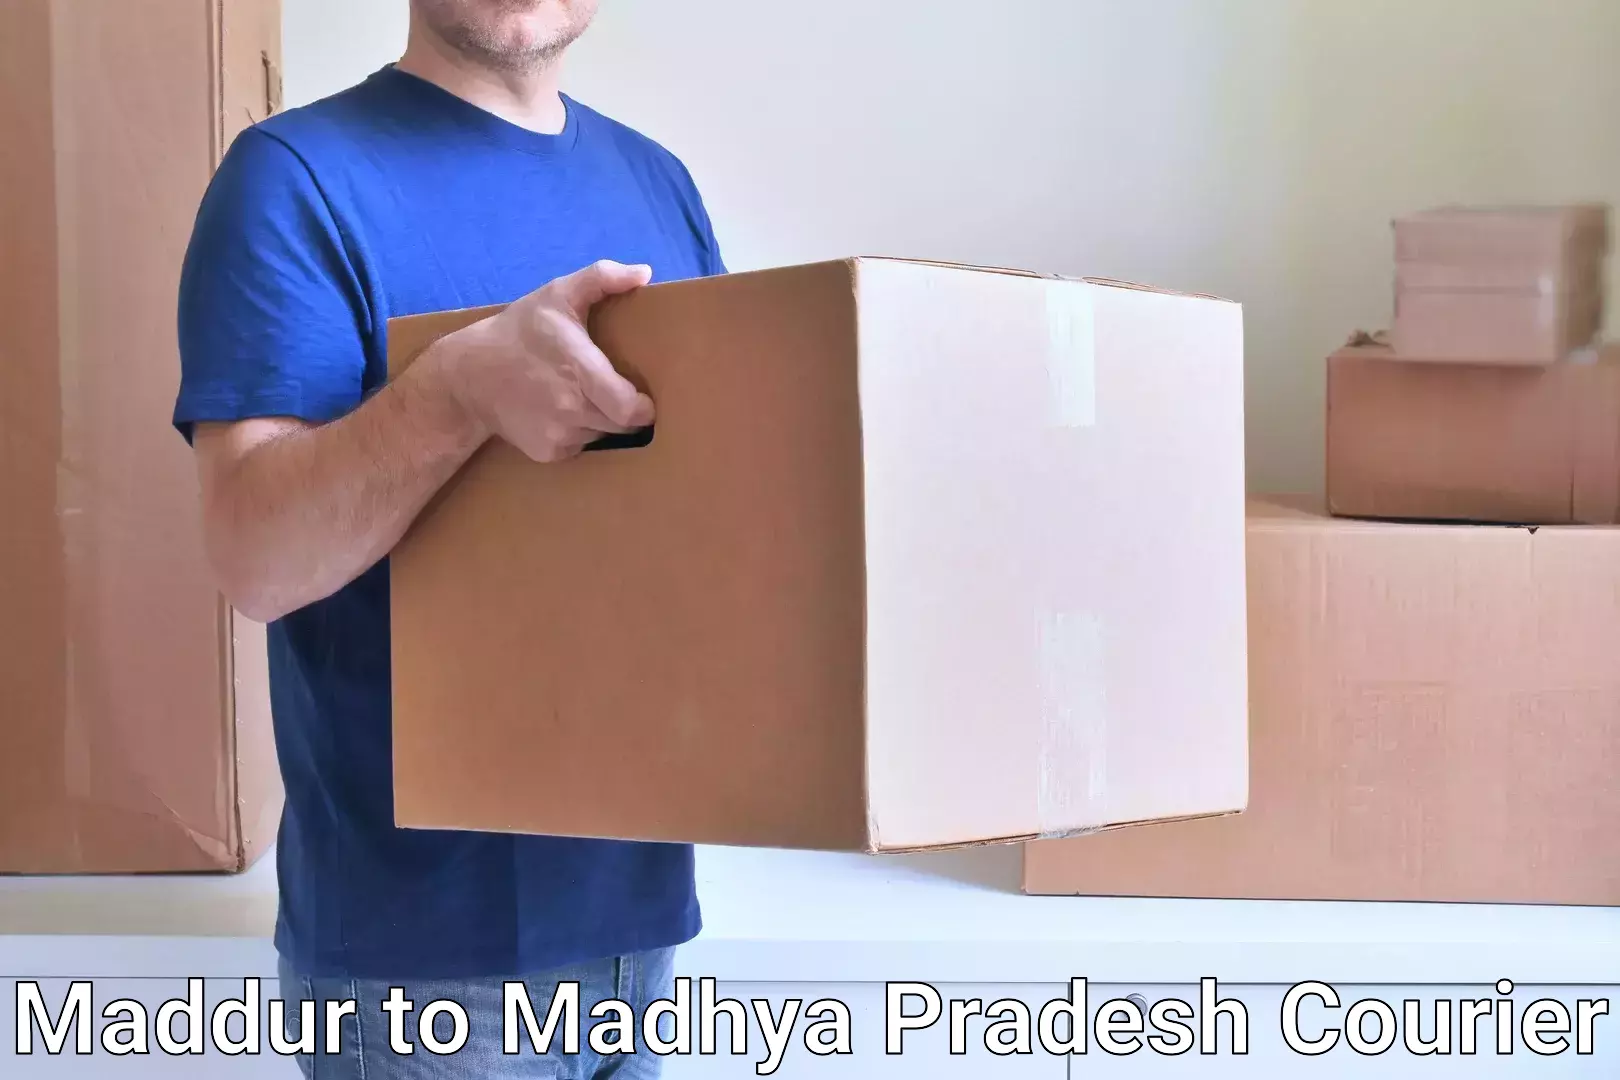 Seamless shipping experience Maddur to Depalpur